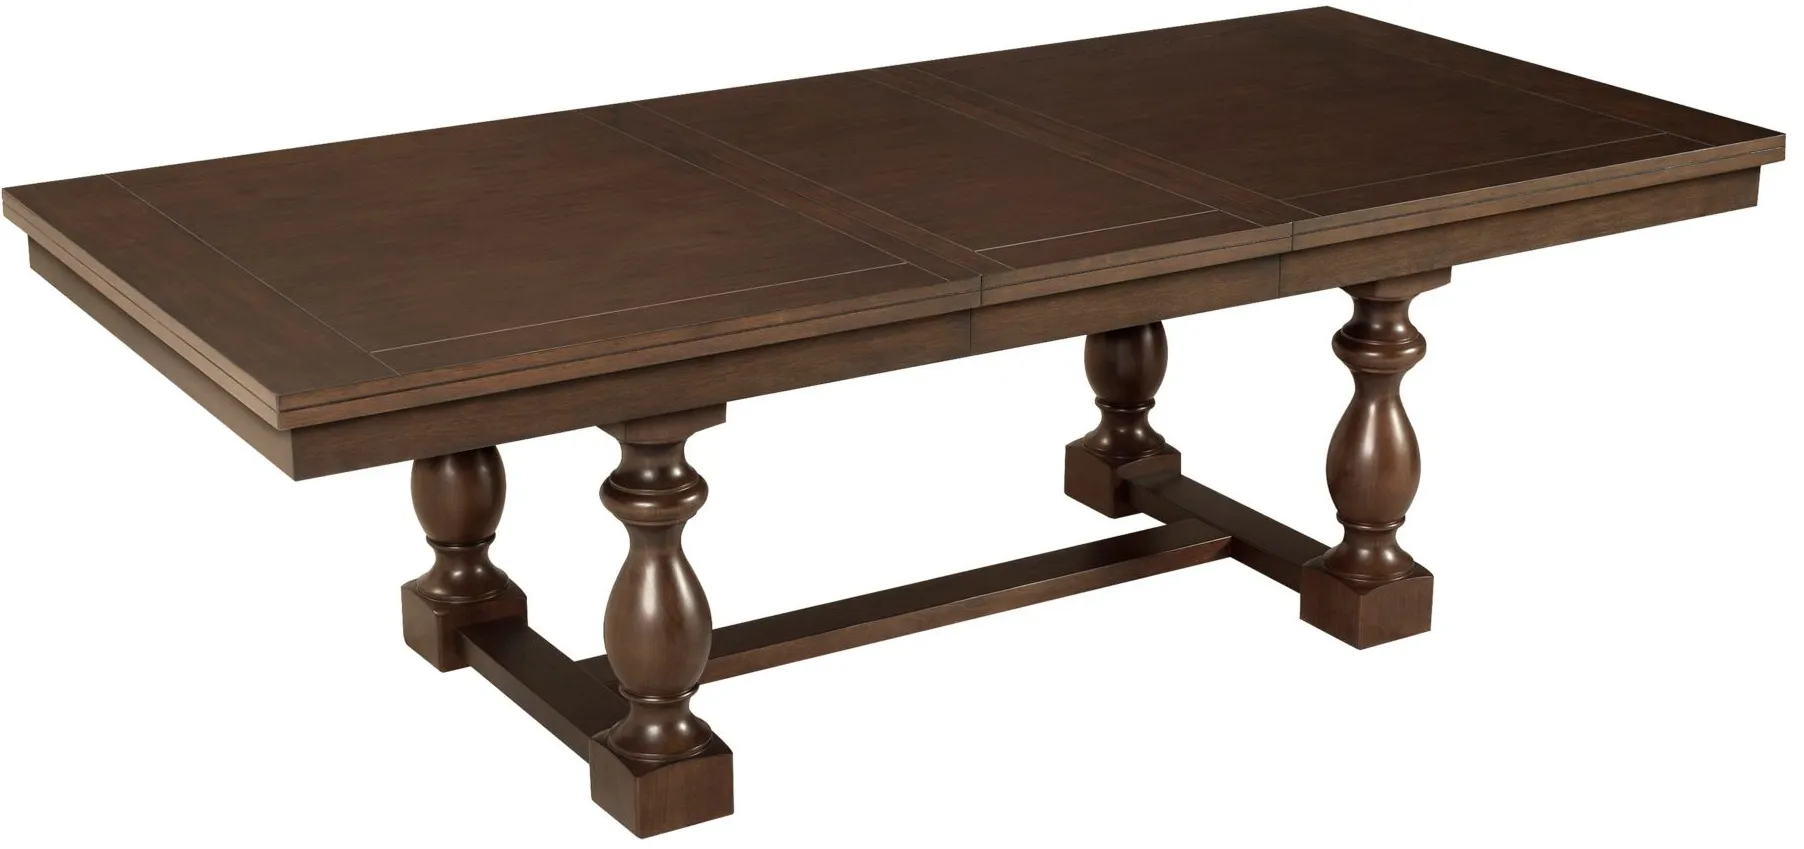 Halloran Dining Table w/ Leaf in Cherry by Homelegance